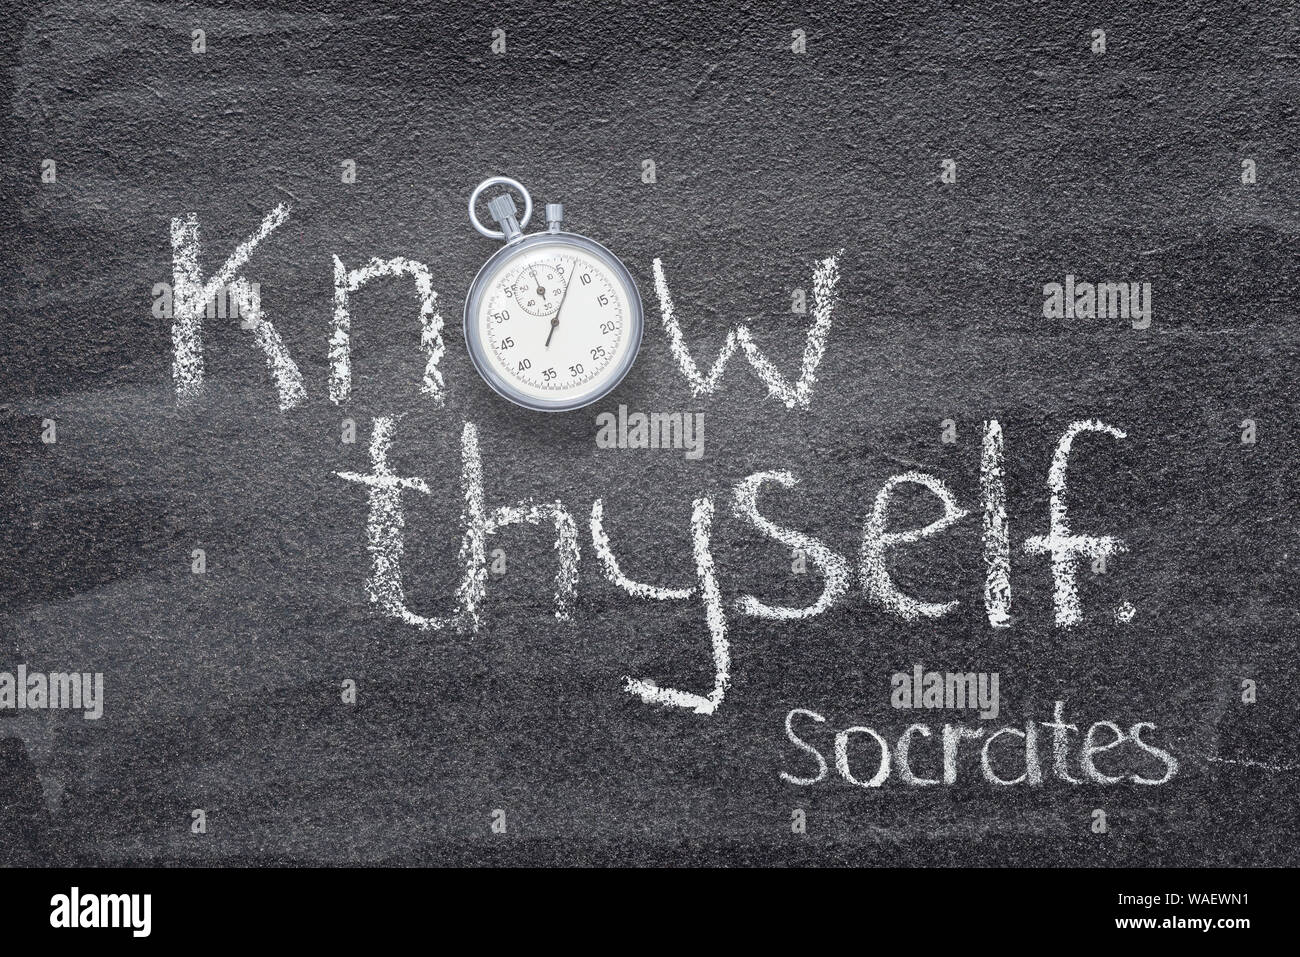 Know thyself - quote of ancient Greek philosopher Socrates written on chalkboard with vintage stopwatch instead of O Stock Photo